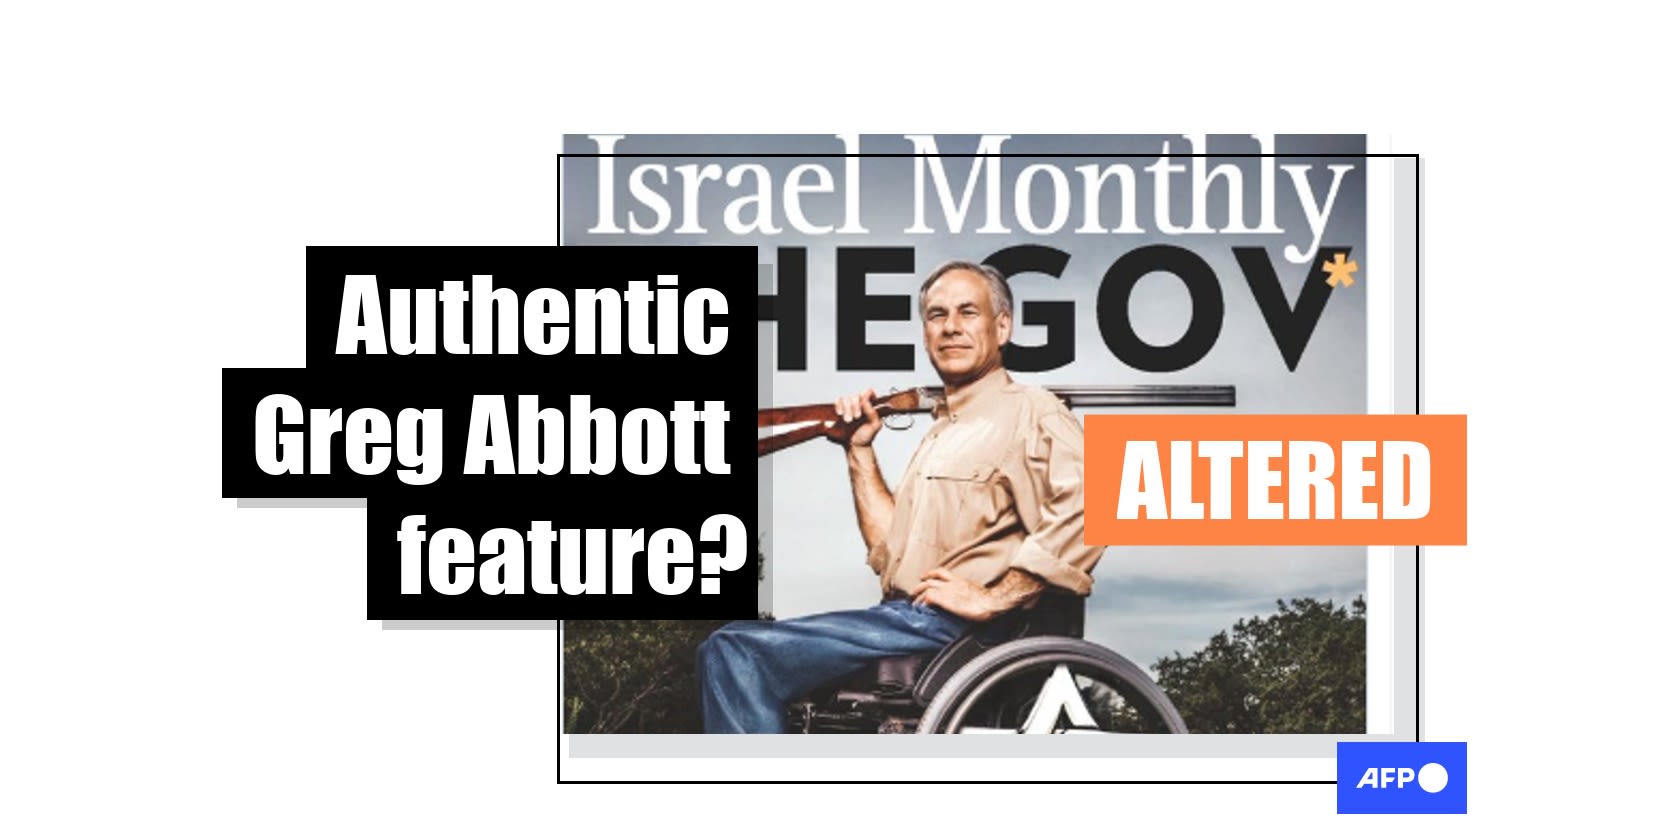 Pro-Israel magazine cover featuring Texas governor is fake